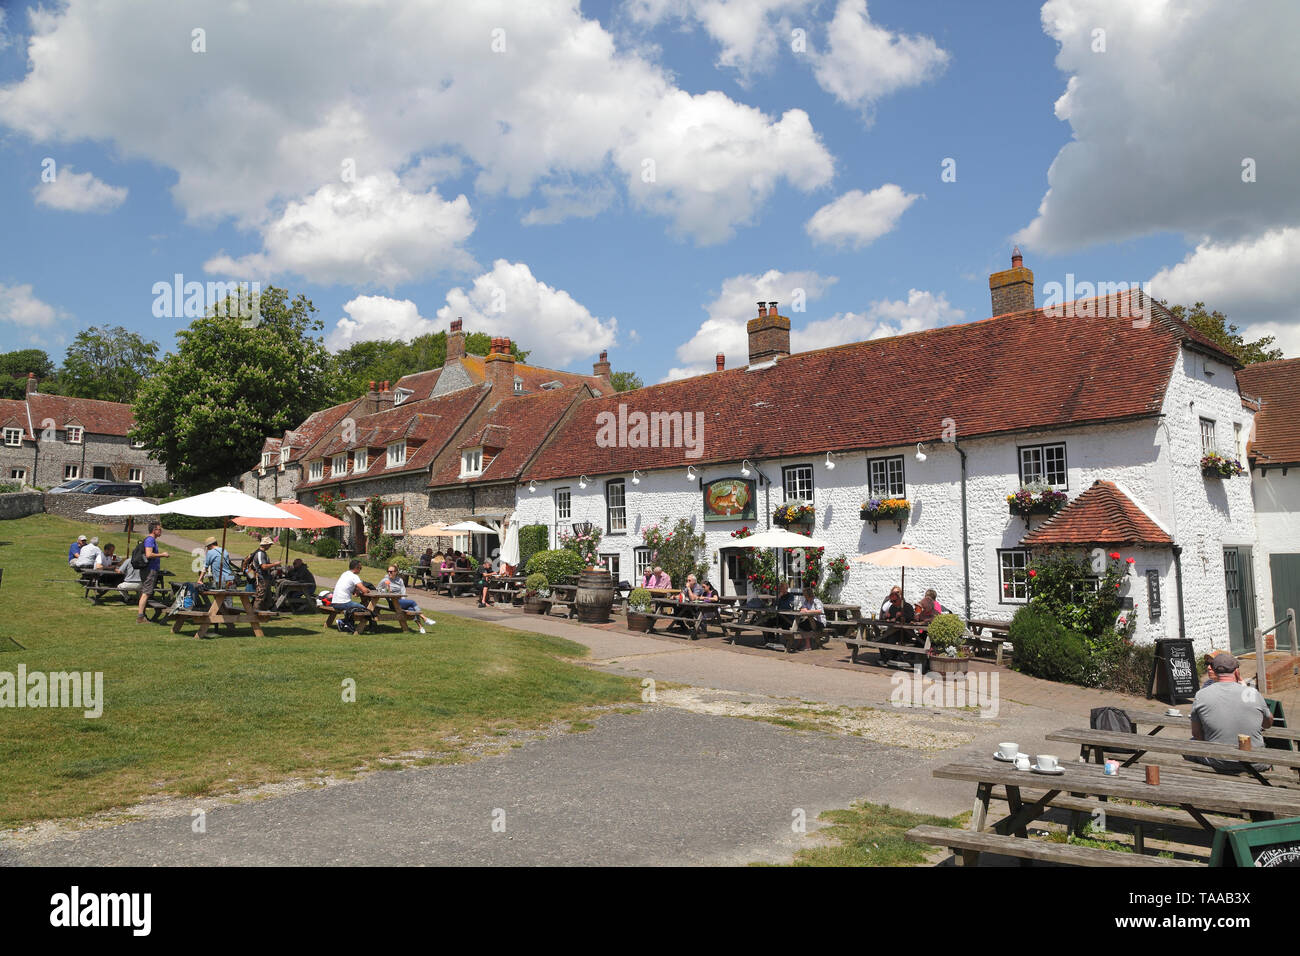 The picturesque Tiger Inn at East Dean, East Sussex; popular with walkers and hikers on the South Downs, UK, GB Stock Photo